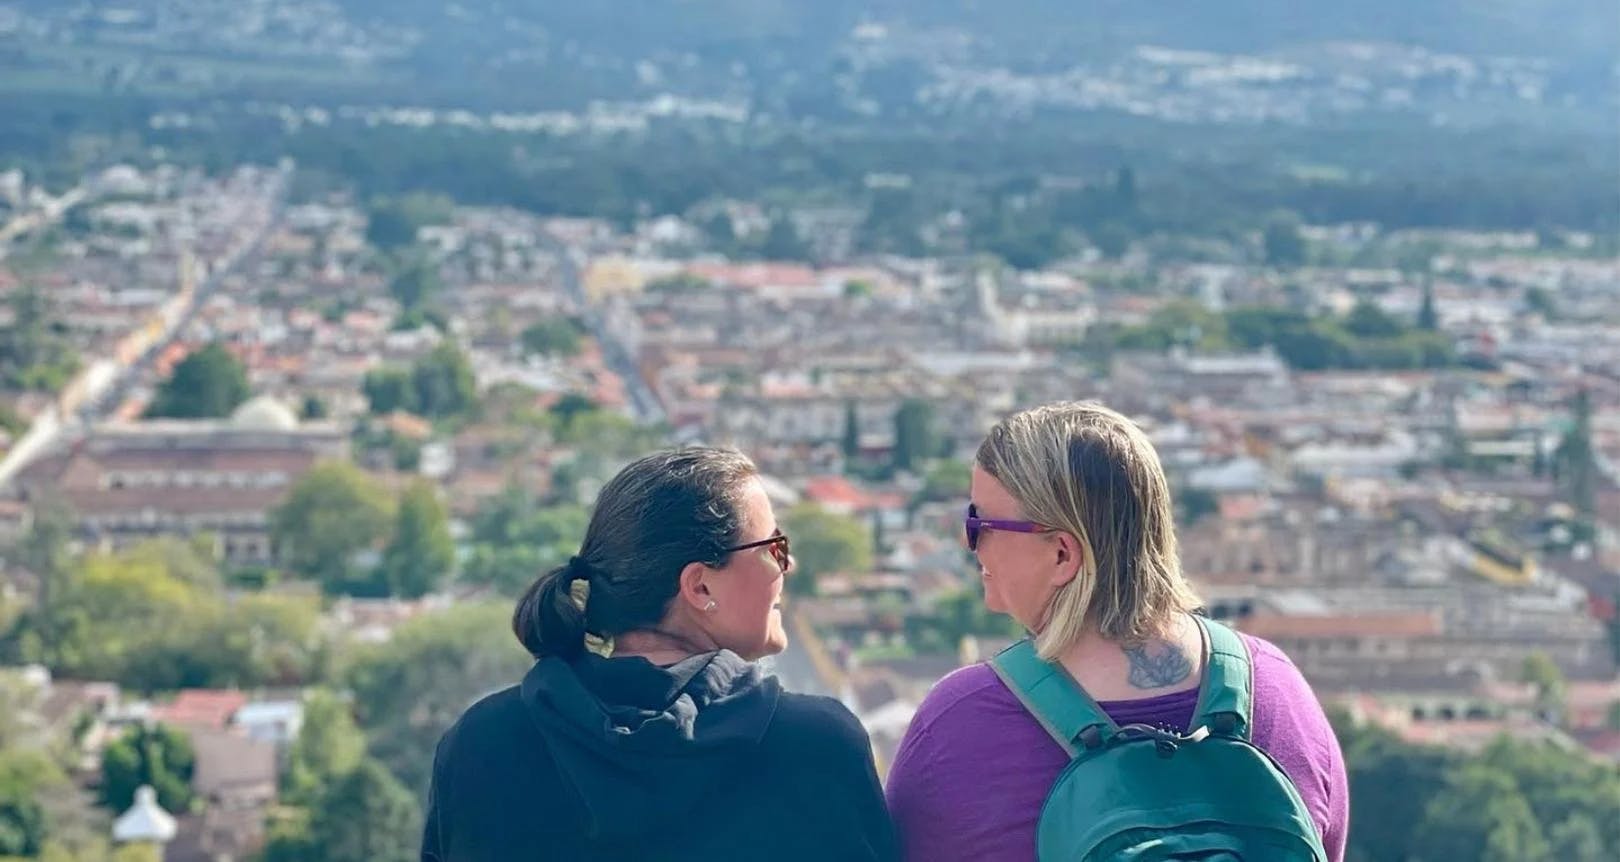 Meredith and Janae: Queer Business Owners Traveling the World as a Couple
